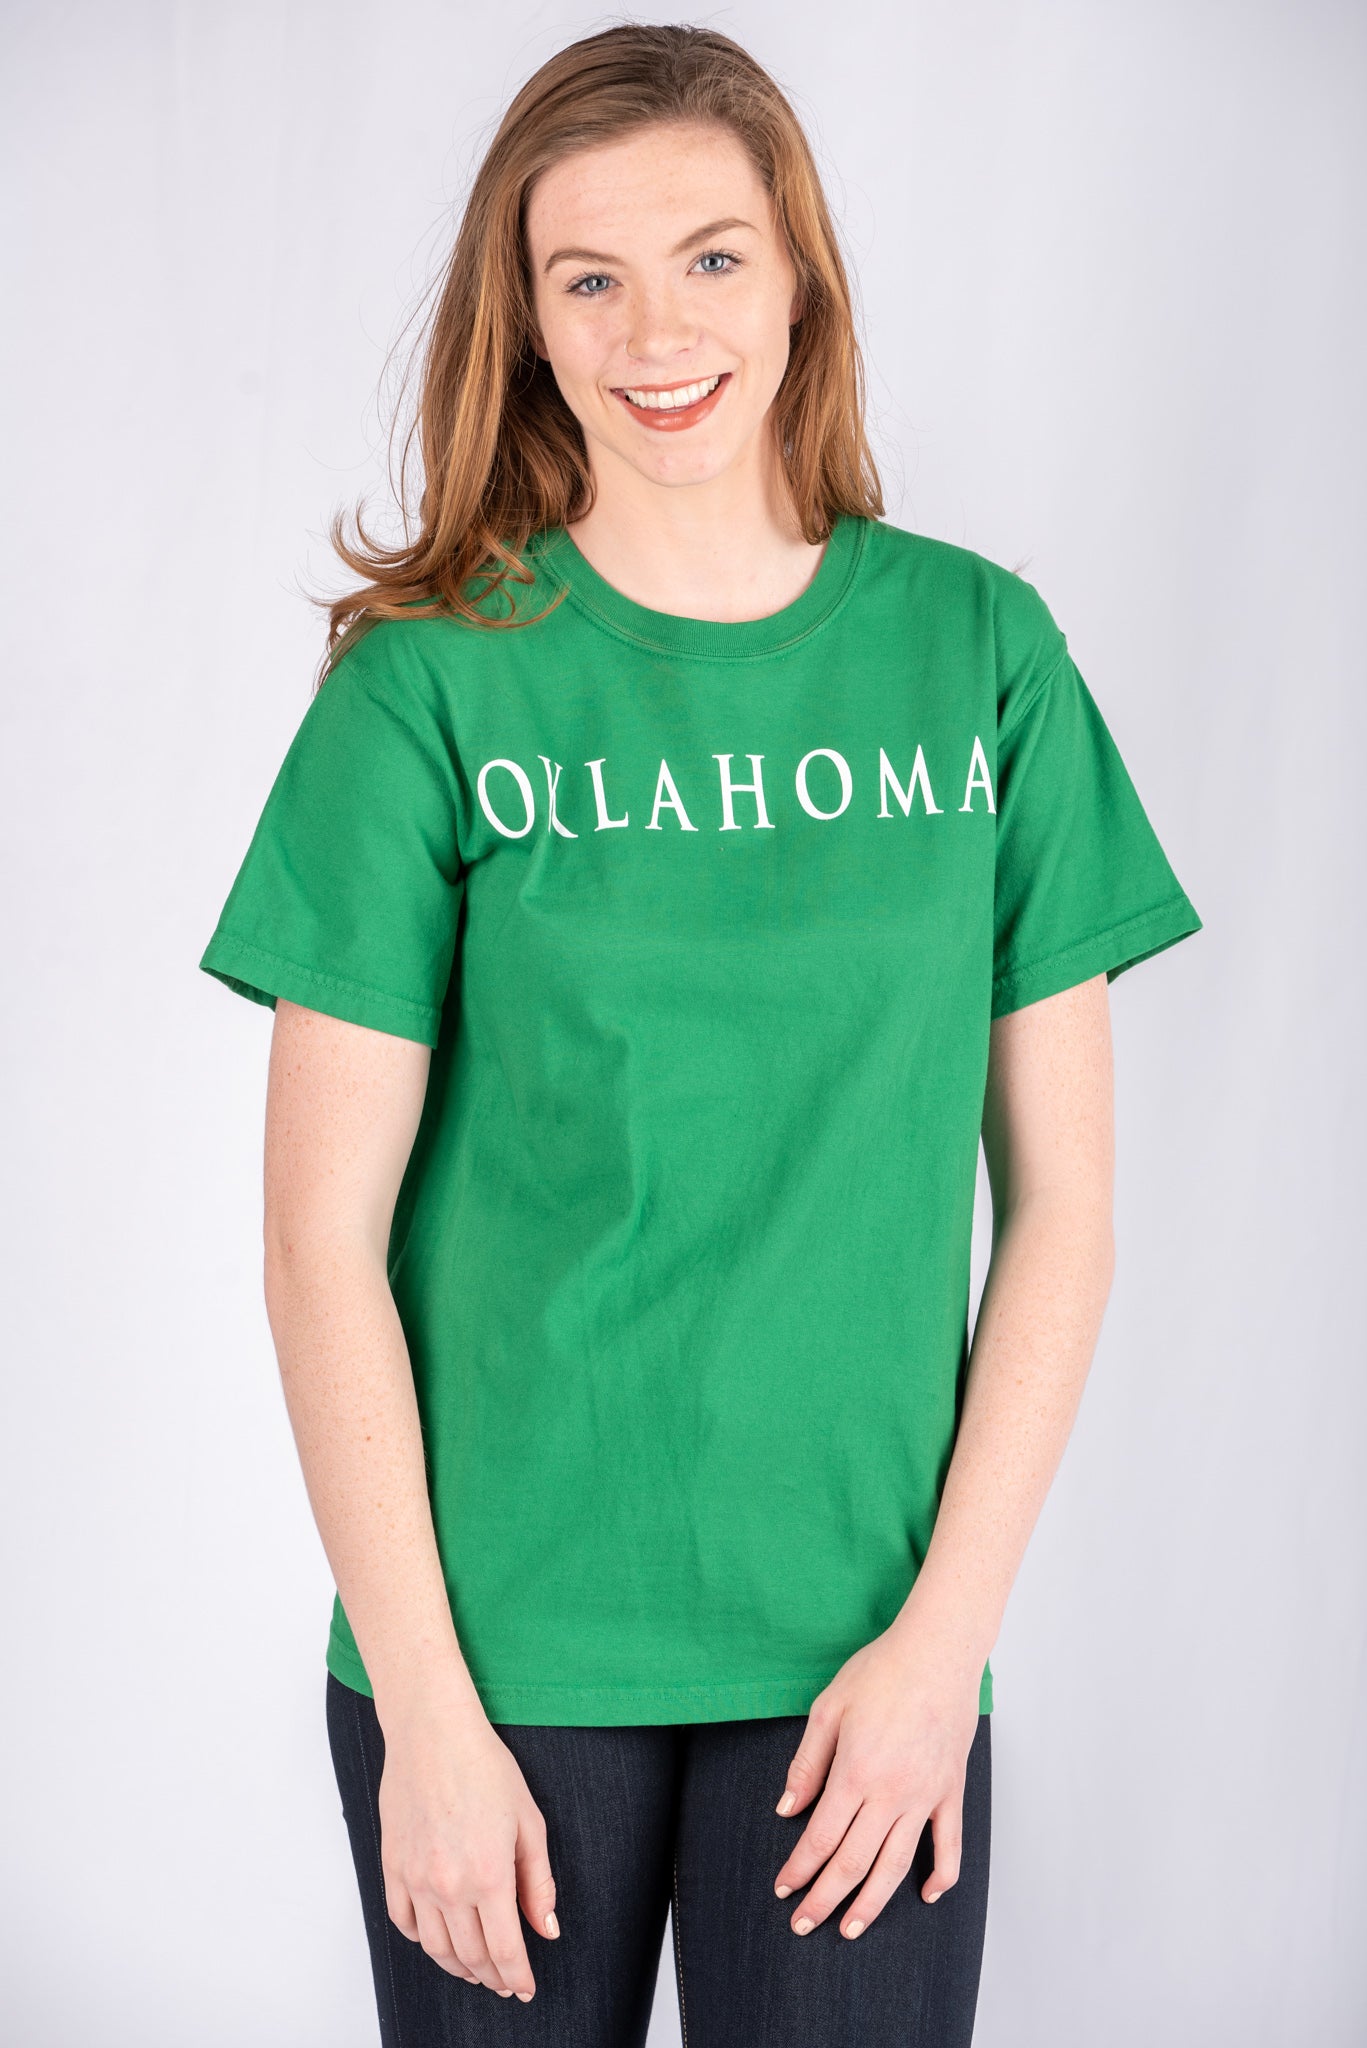 Oklahoma Simply Clover Comfort Color Green T-shirt - Cute T-shirts - Trendy Graphic T-Shirts at Lush Fashion Lounge Boutique in Oklahoma City